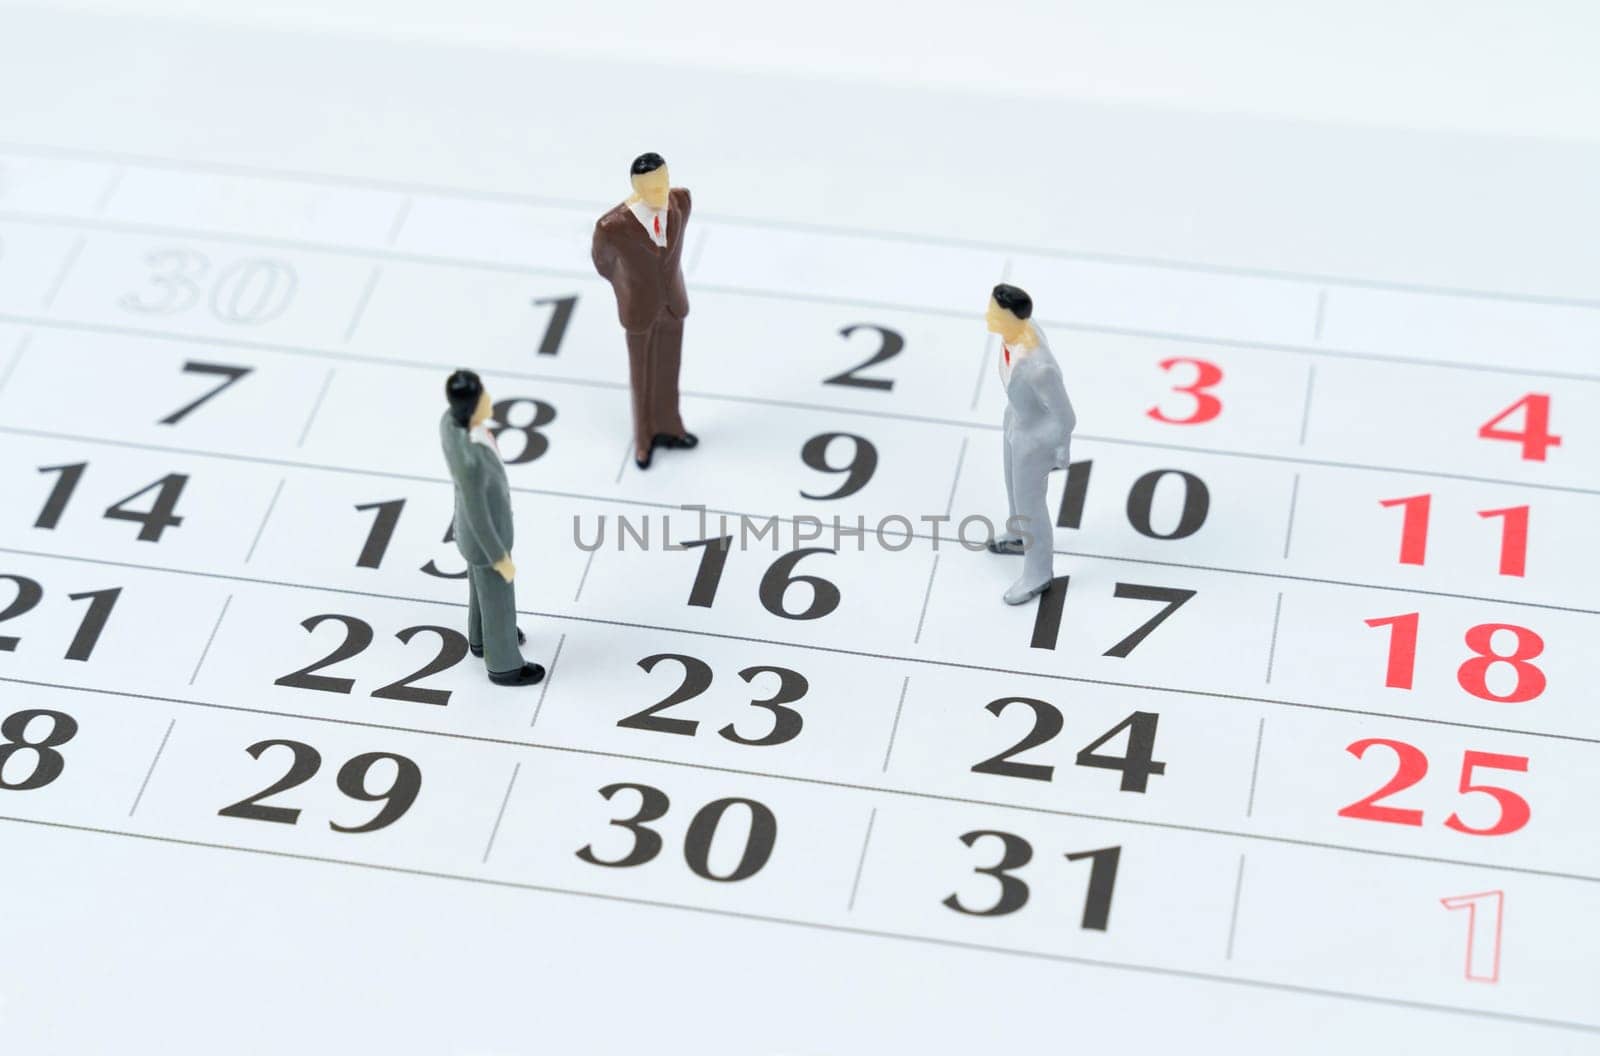 Business and finance concept. There are miniature figures of businessmen on the calendar - business planning